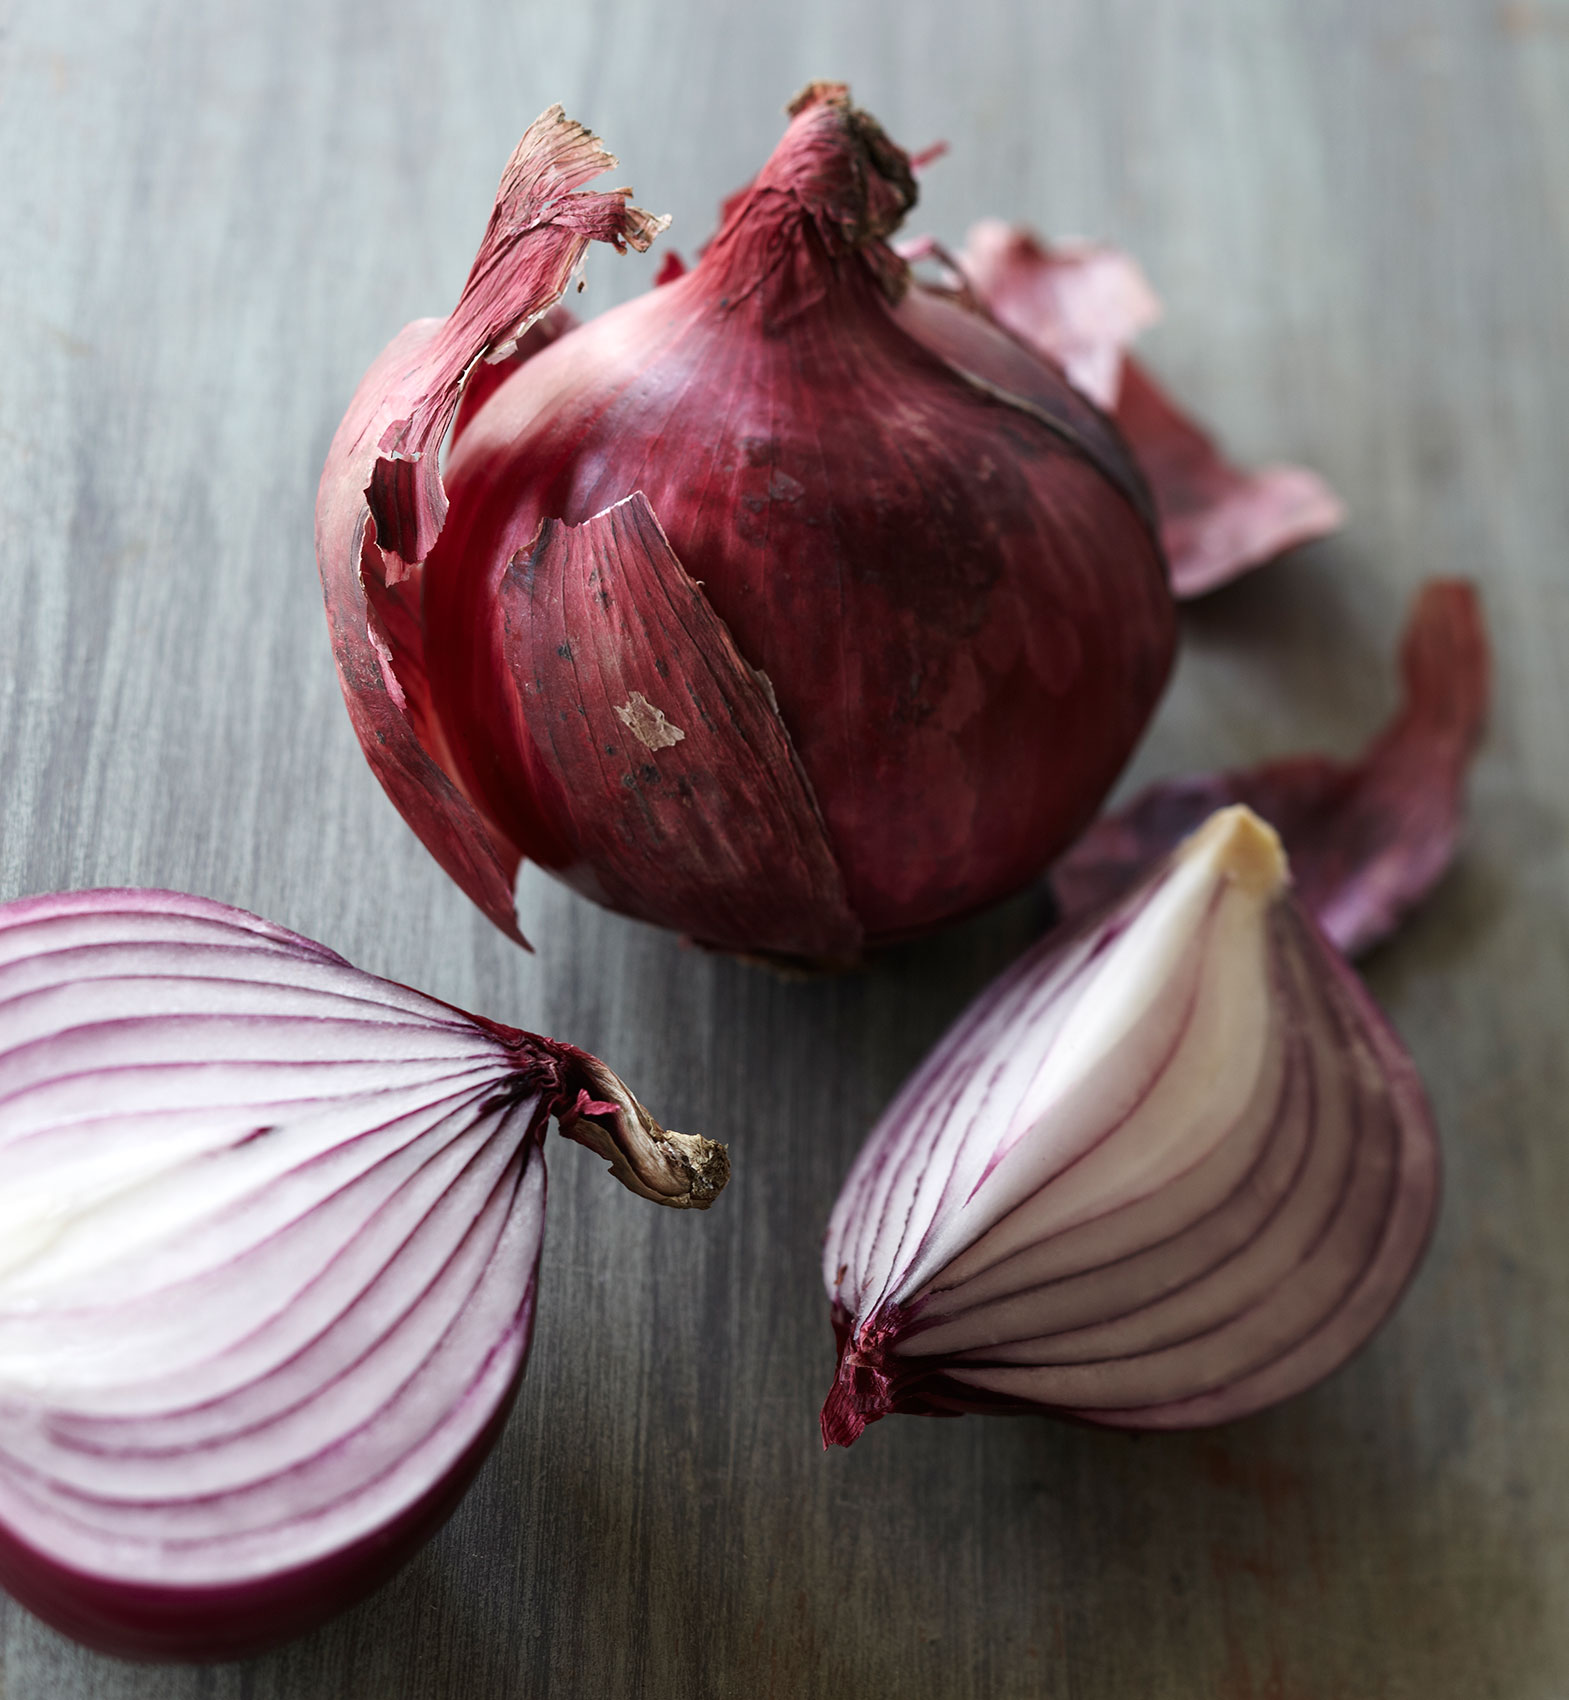 Everyday • Cut & Whole Red Onion with Skin on Wood Grain Bench  • Hospitality & Editorial Food Photography